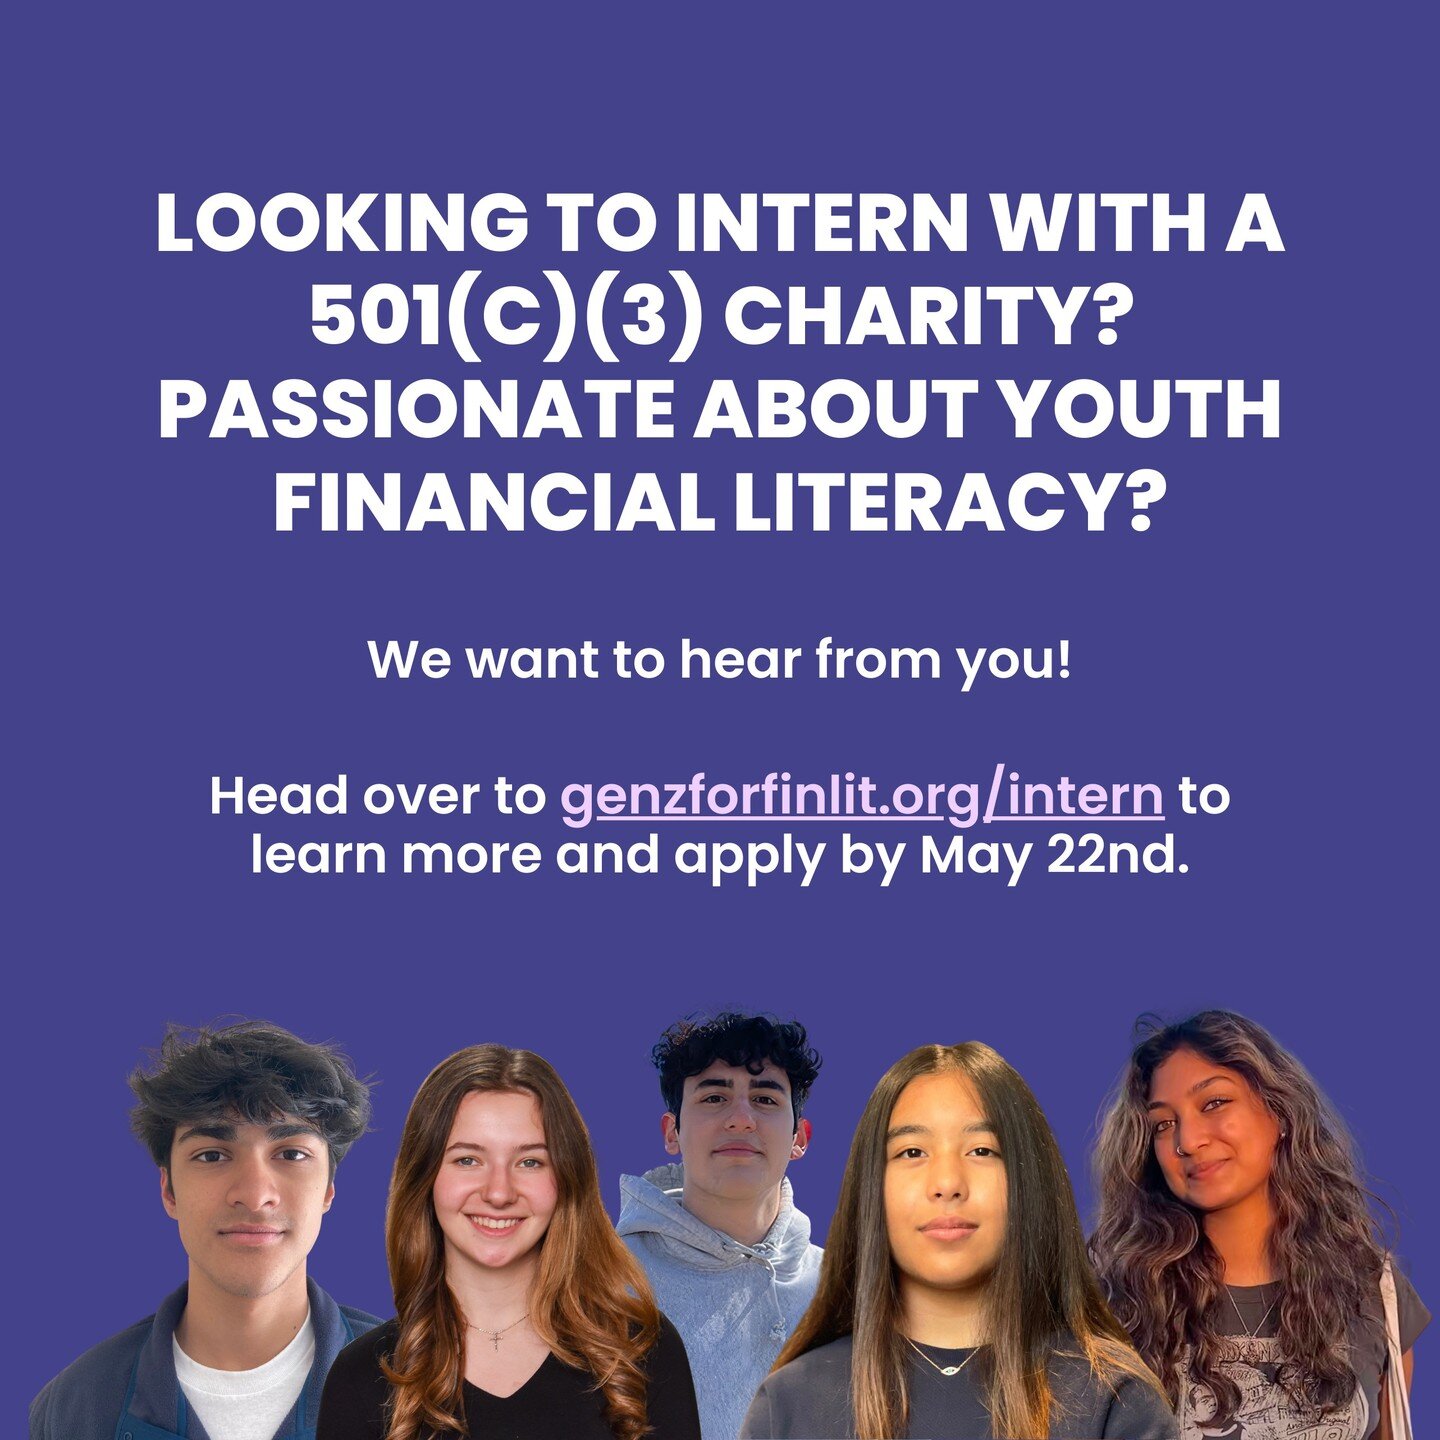 Are you looking for an opportunity to gain valuable work experience and make a difference in your community? Consider applying for an internship with Gen-Z for Financial Literacy this summer! As an intern, you will have the chance to work alongside e